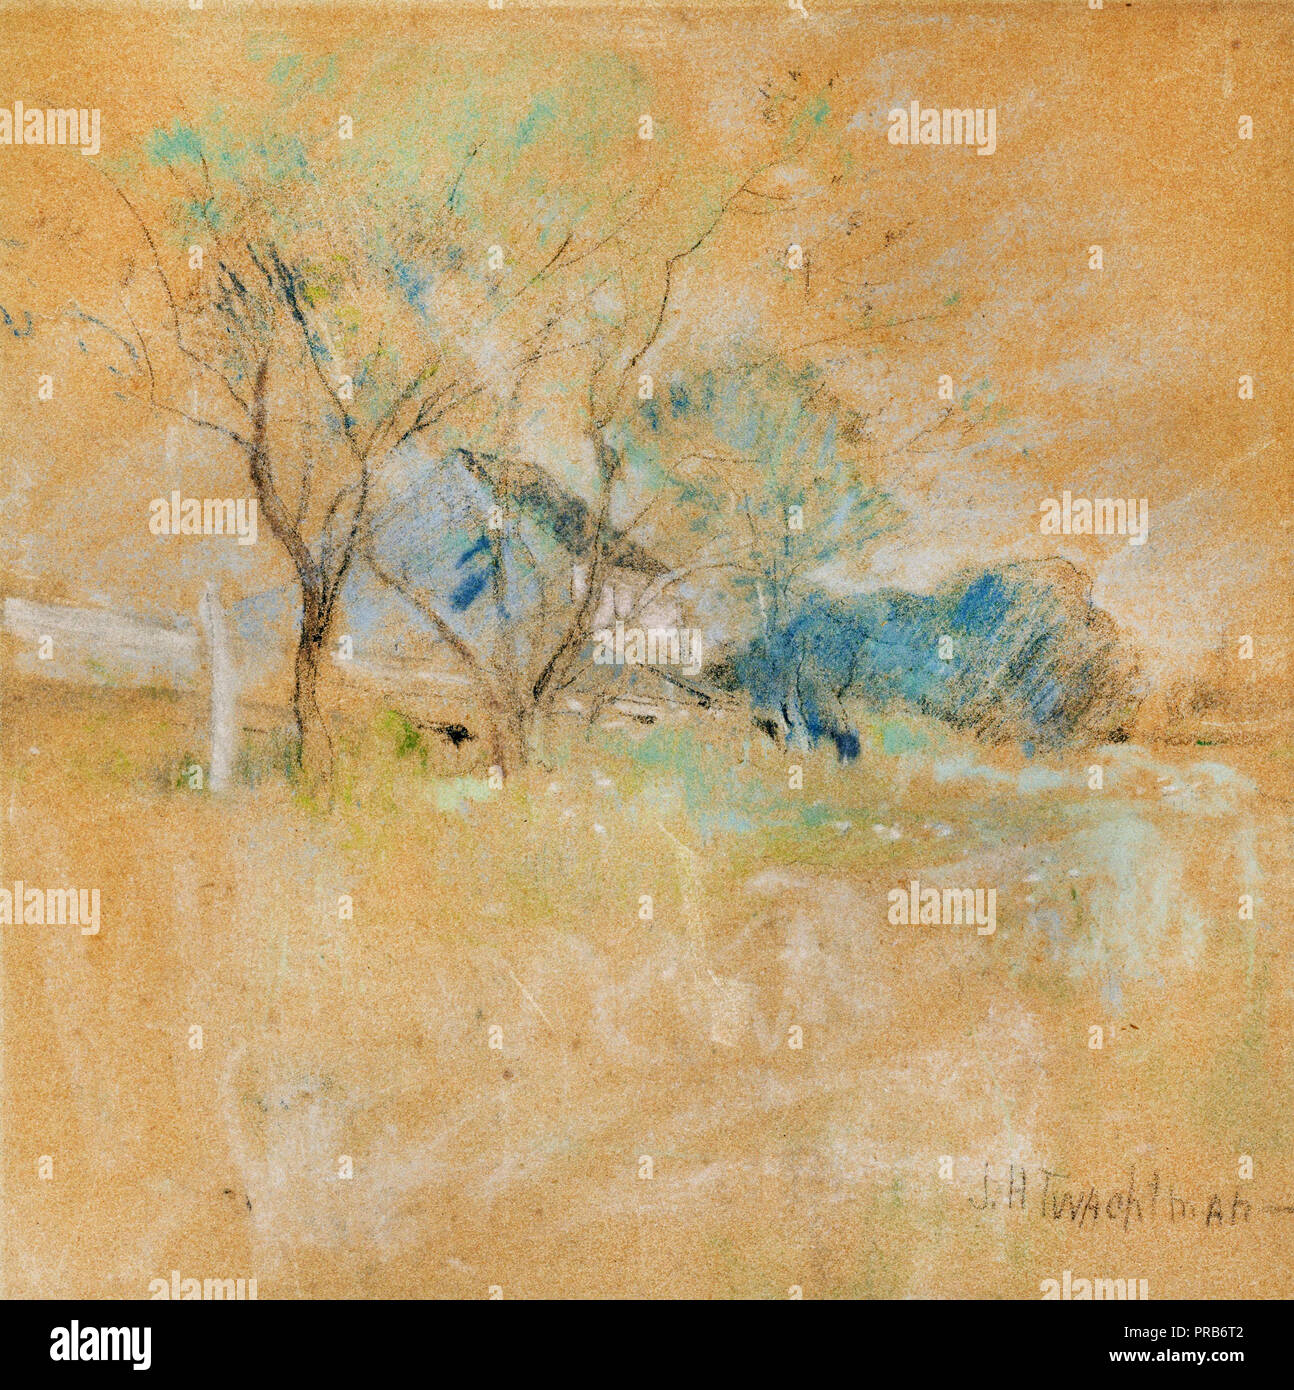 John Henry Twachtman, House and Tree, Undated, Pastel on colored paper, The Phillips Collection, Washington, D.C., USA. Stock Photo